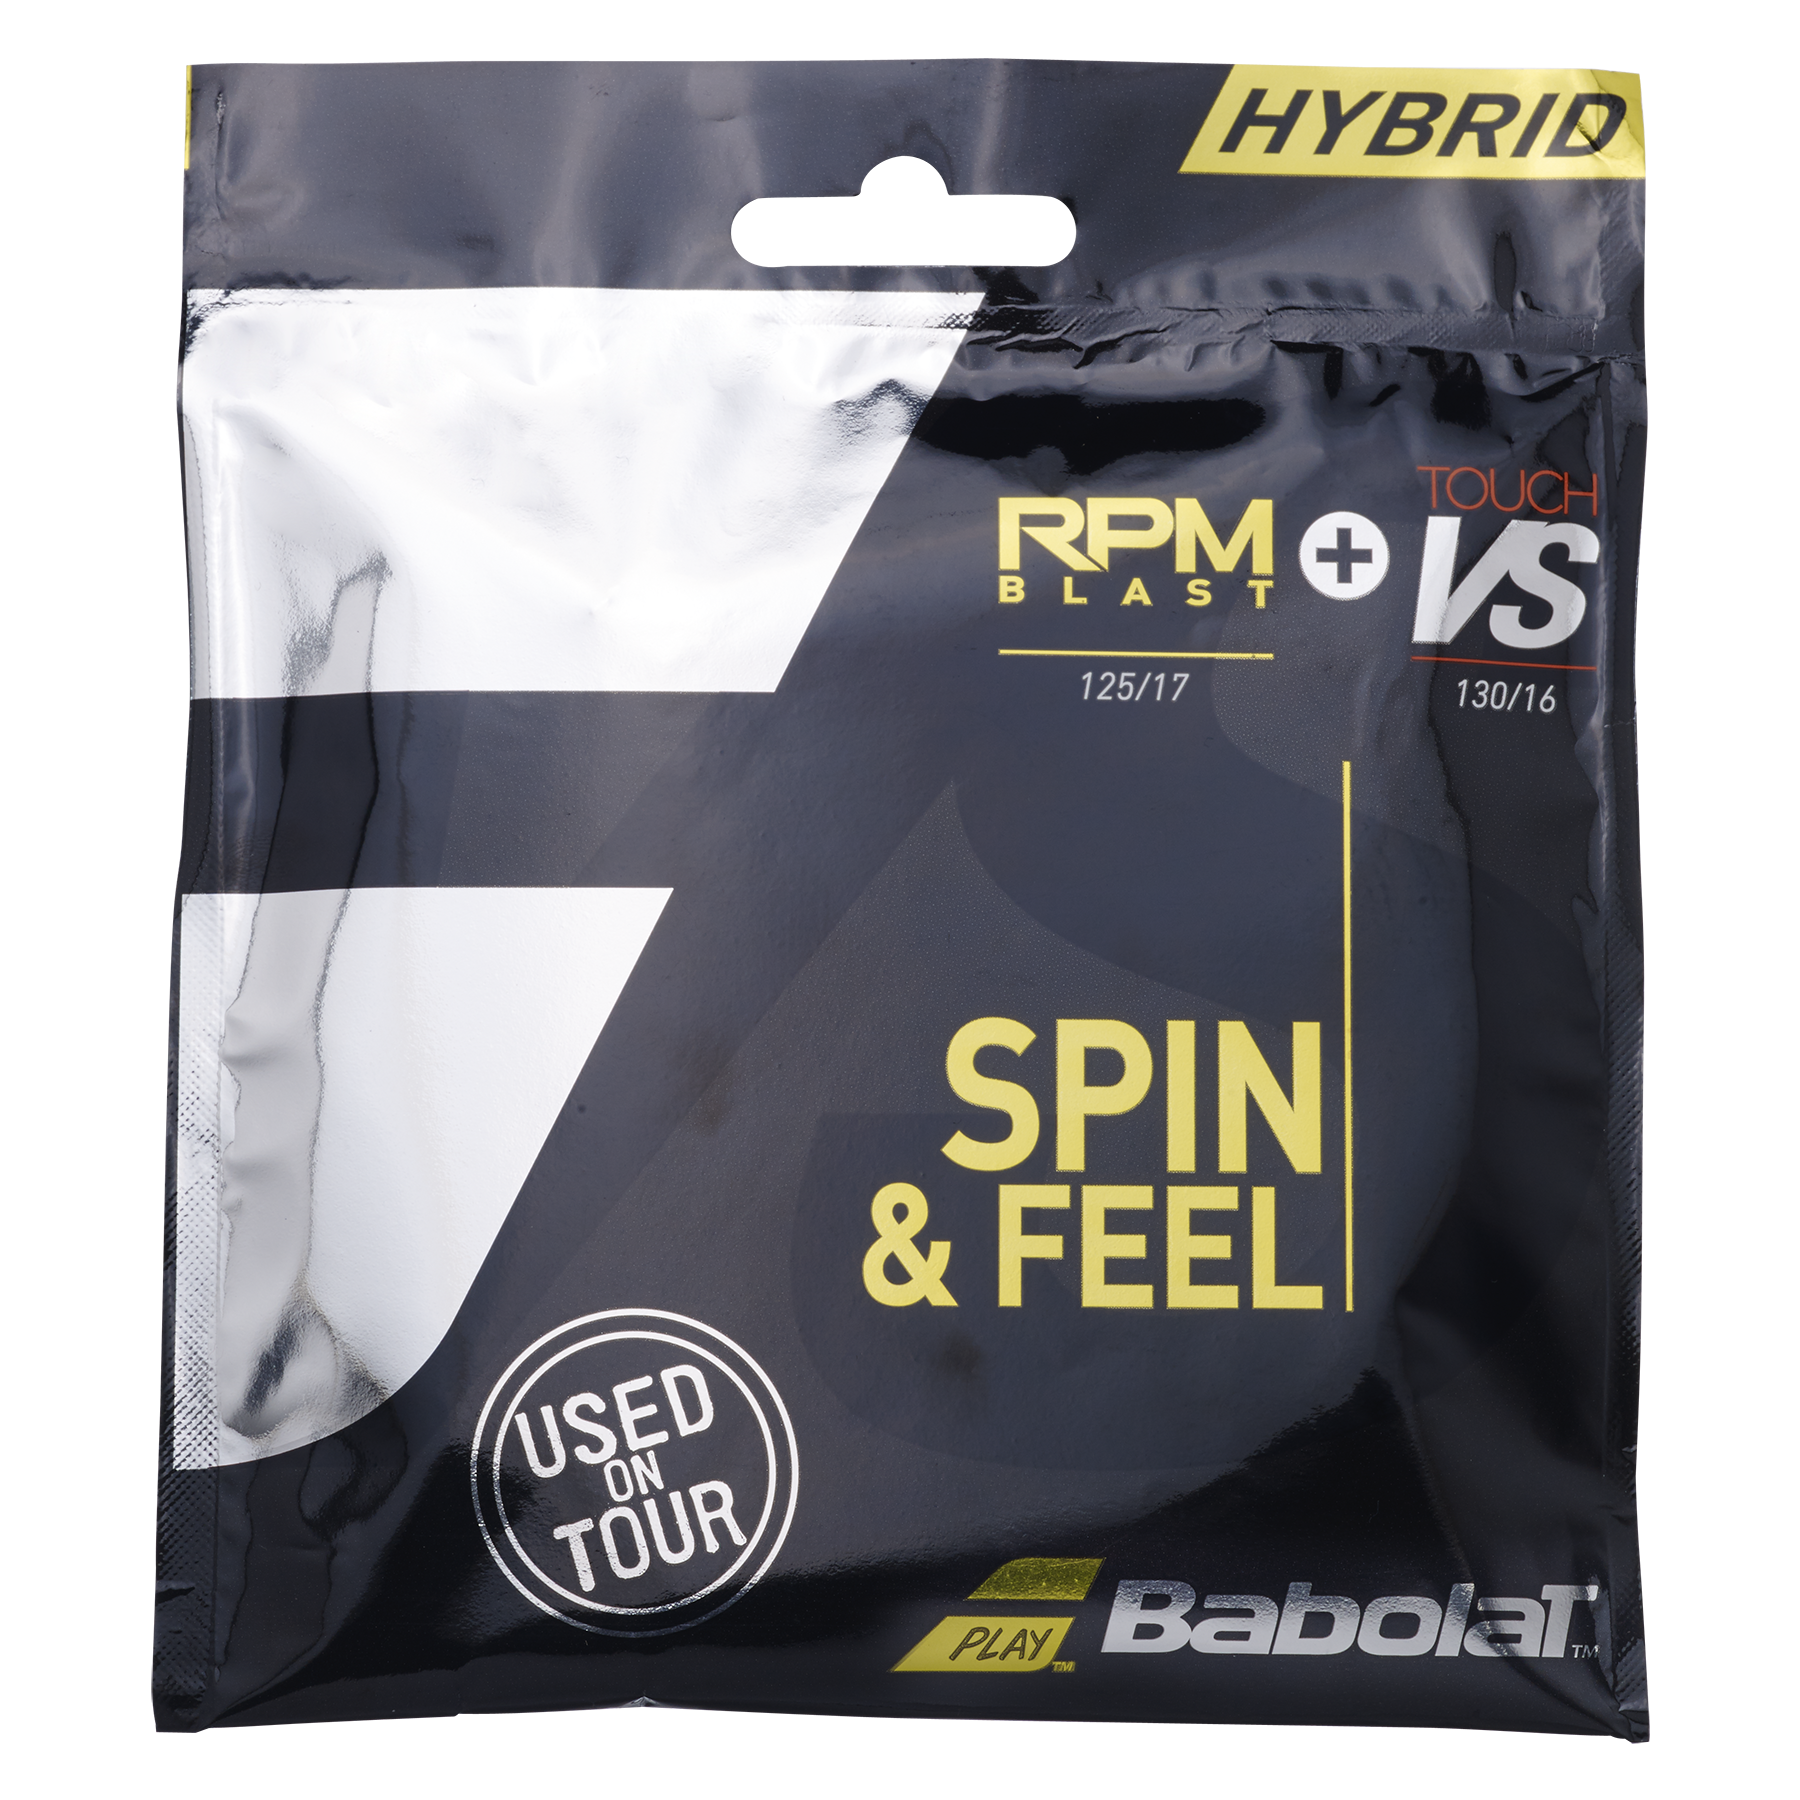 Tennis Strings RPM Blast 125 + Touch VS 130 Babolat Official Website